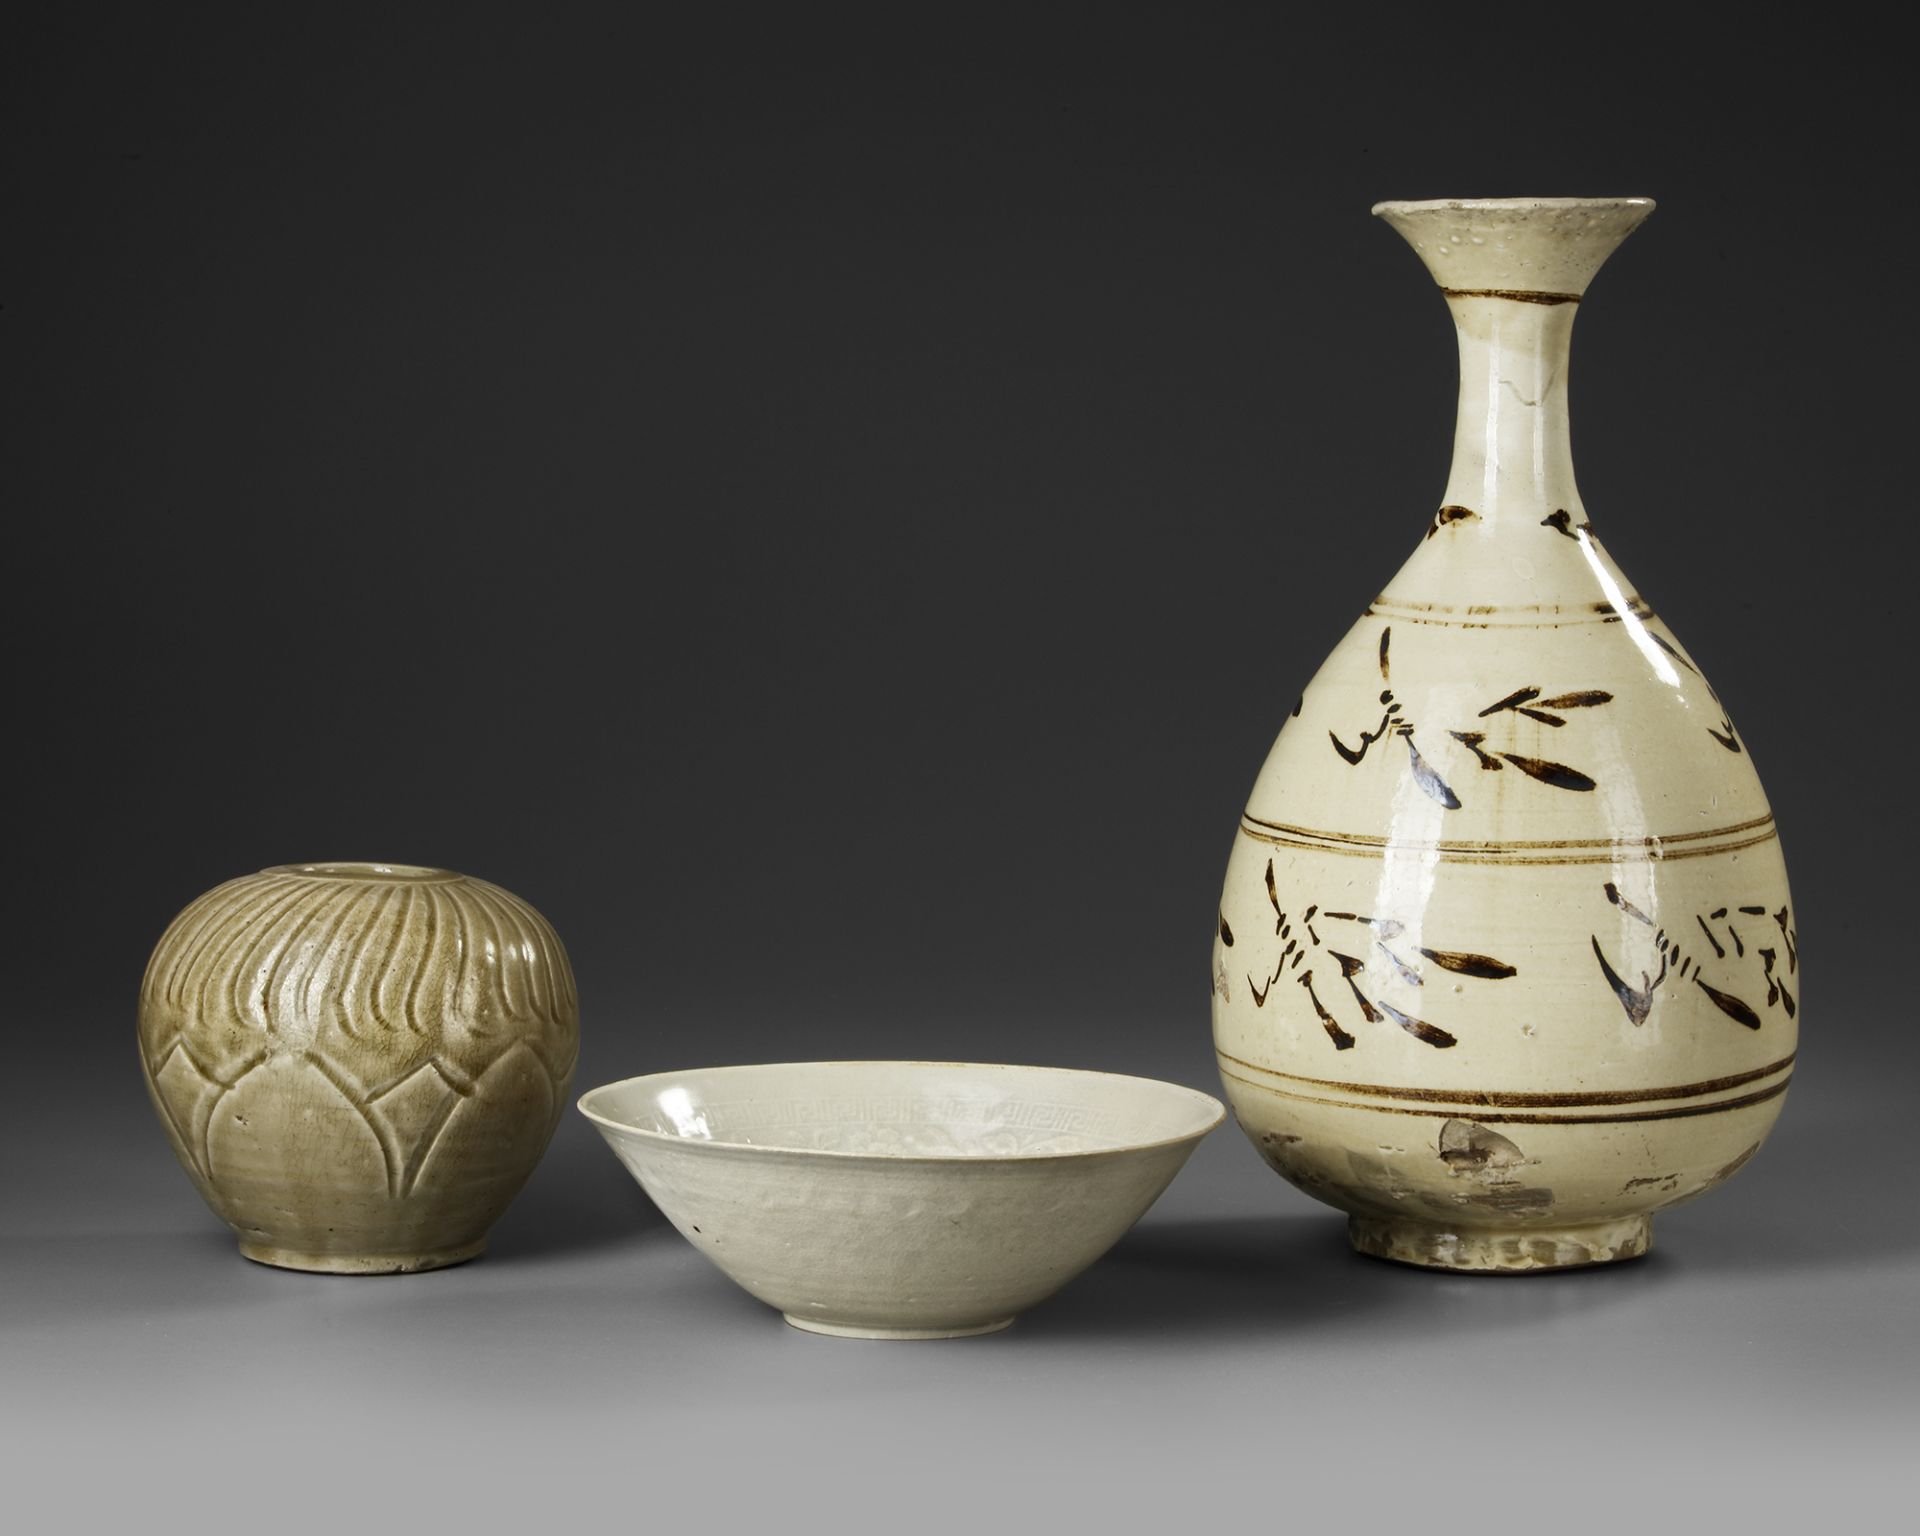 THREE CHINESE WARES IN VARIOUS MATERIALS, FIVE DYNASTIES ( 907-960) /SONG DYNASTY (960-1279) - Image 2 of 6